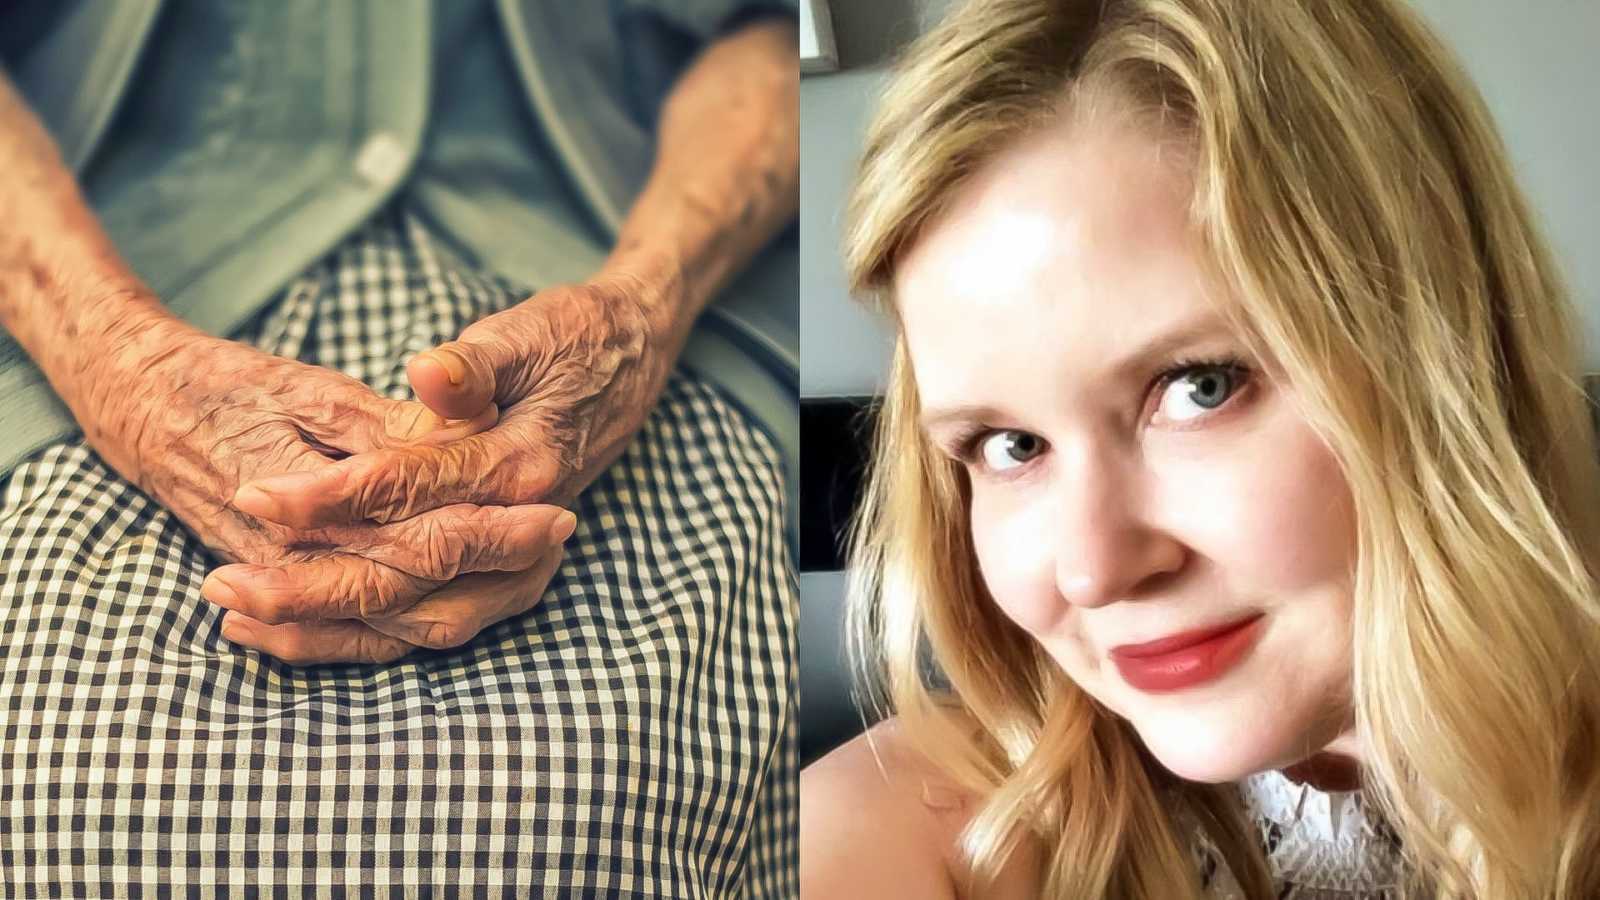 daughter smiling in selfie and mom with alzheimer's hands